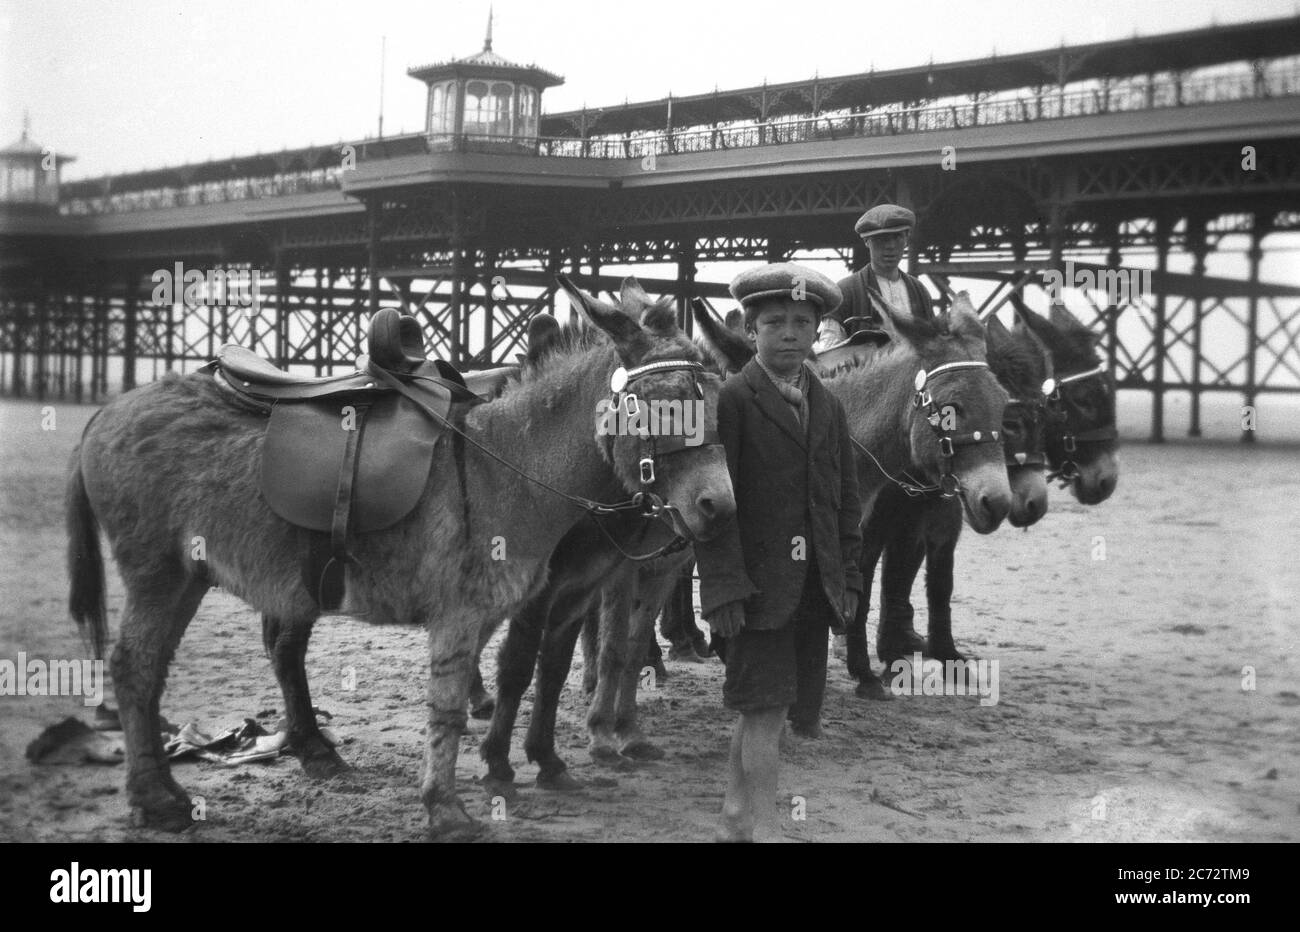 1920s, historical, on a sandy beach, below a large covered victorian pier, a young boy and young man, both wearing cloth caps, standiing with their donkeys, waiting for customers, England, UK. Riding on a donkey was a traditional activity for children at seaside resorts across Britain in this era. Stock Photo